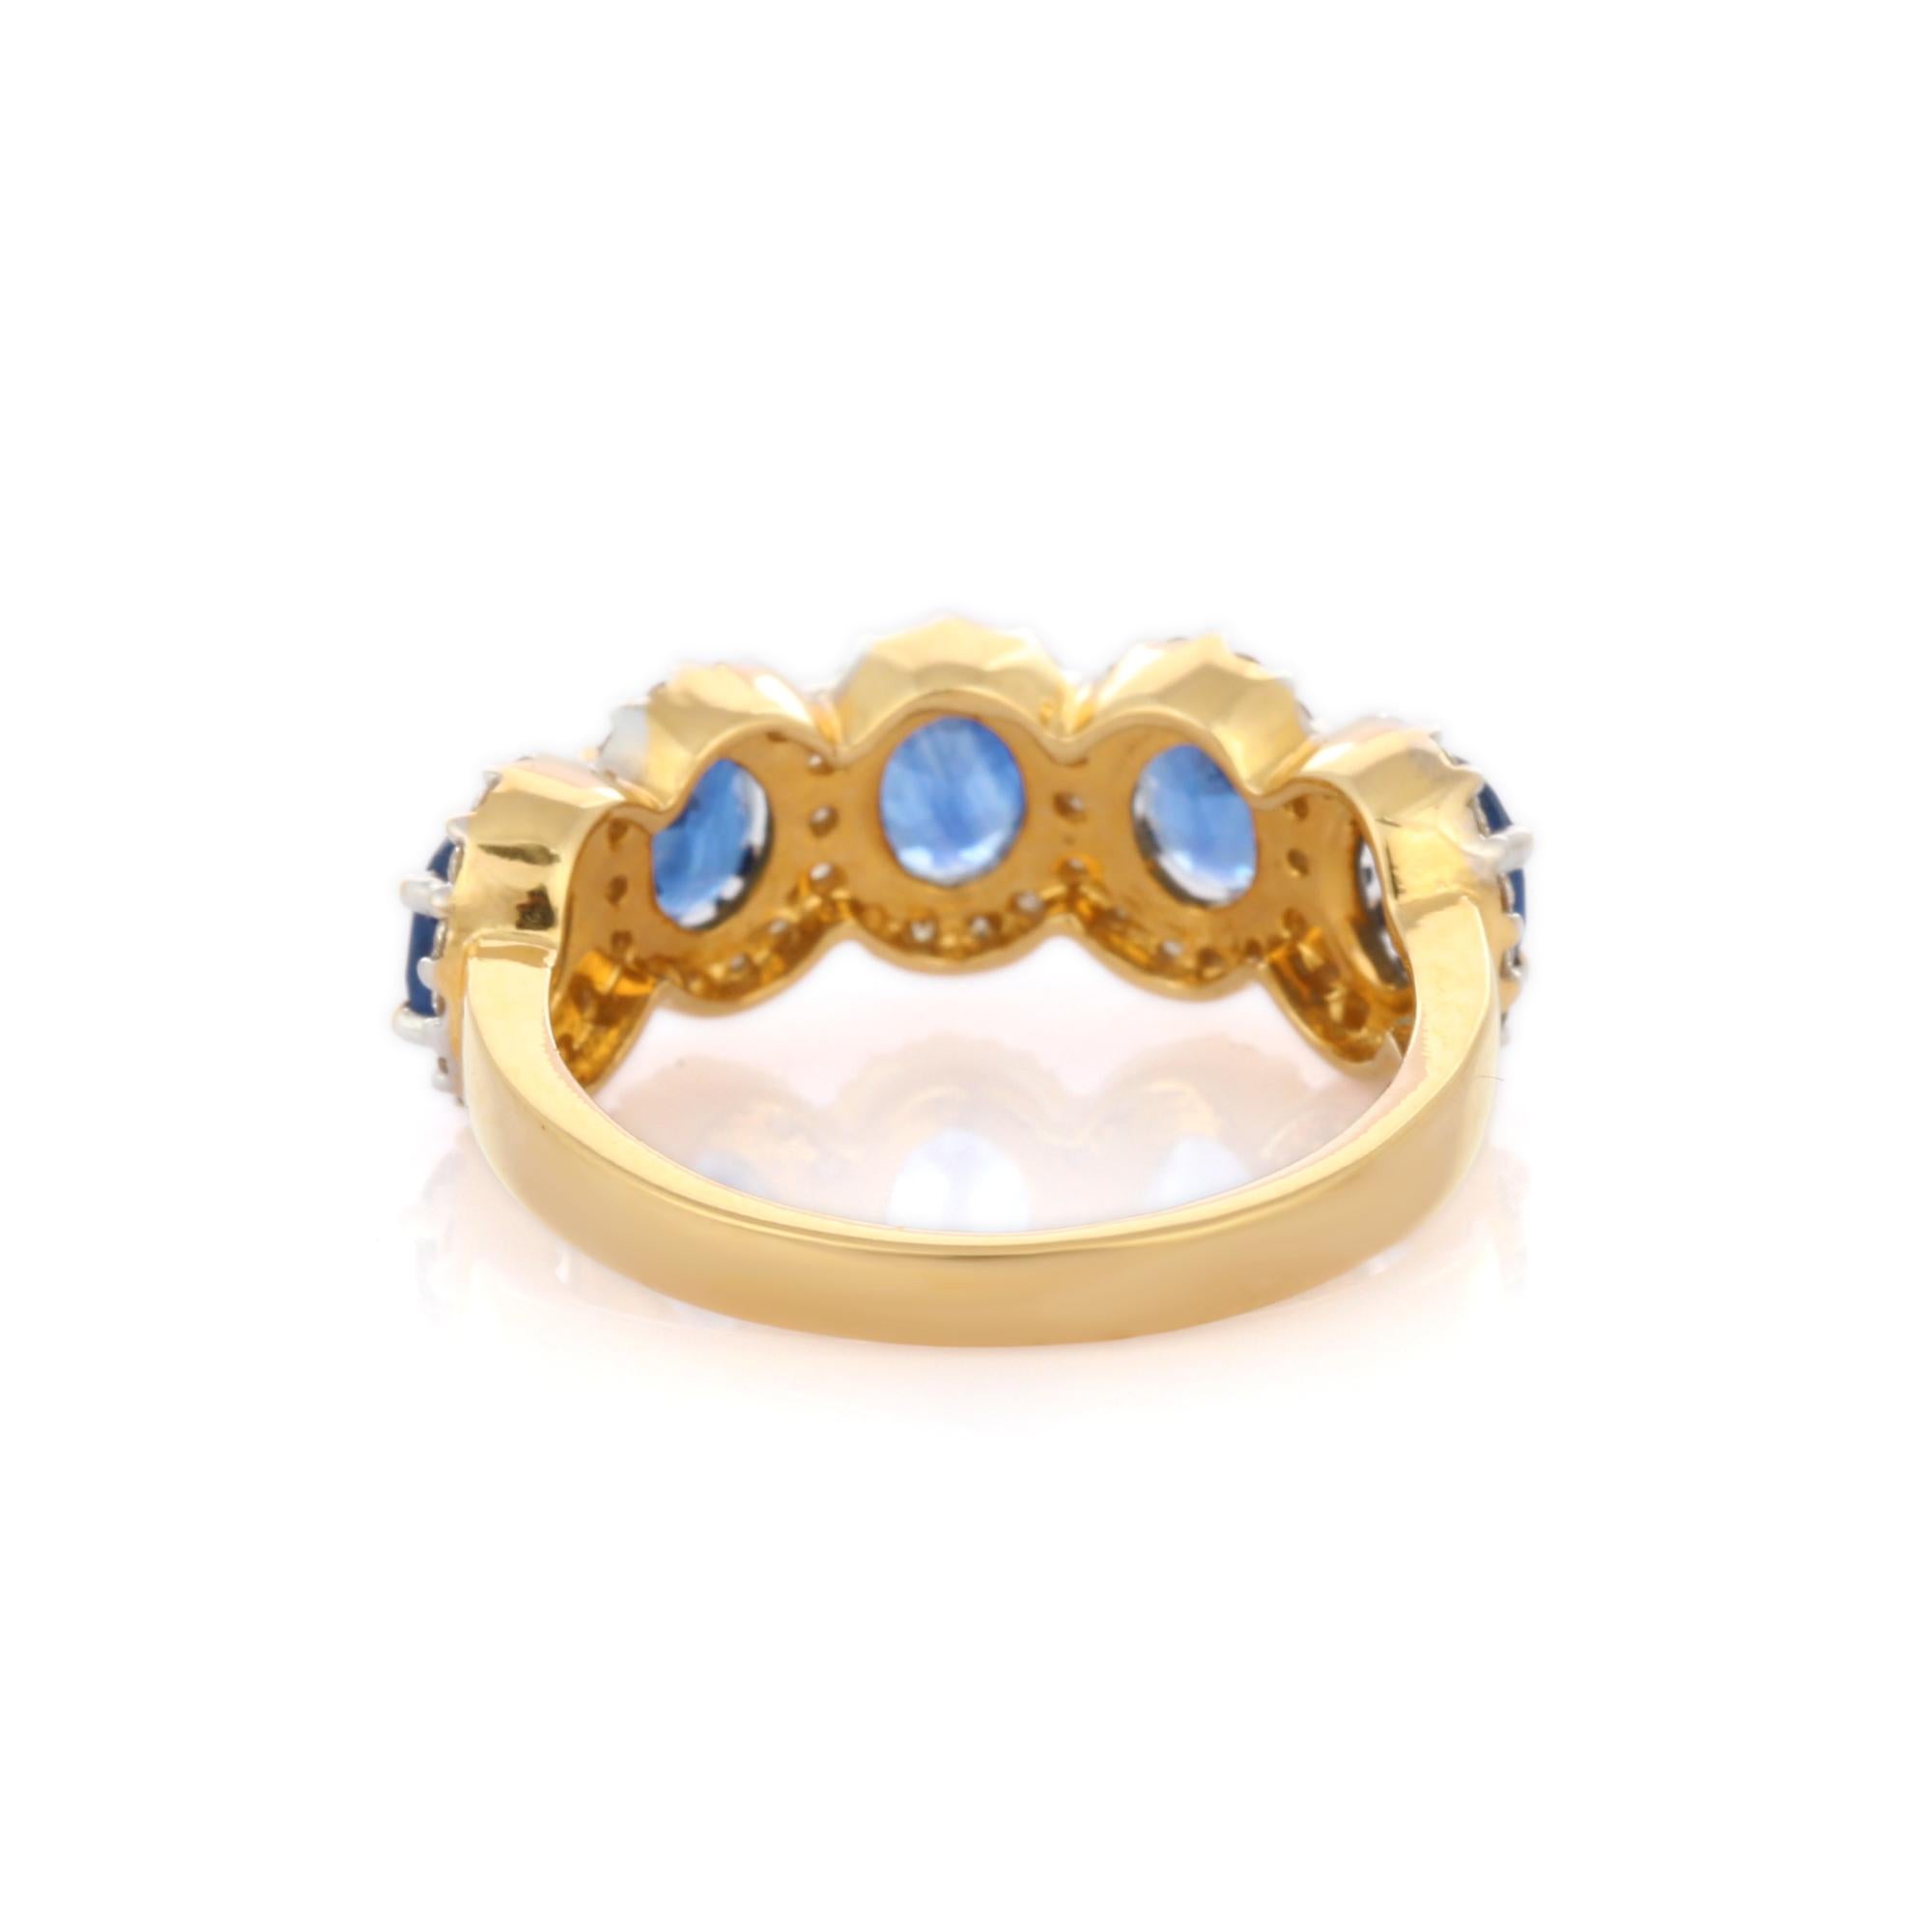 For Sale:  18K Yellow Gold Half Engagement Band with Sapphires Amidst in Diamonds 4